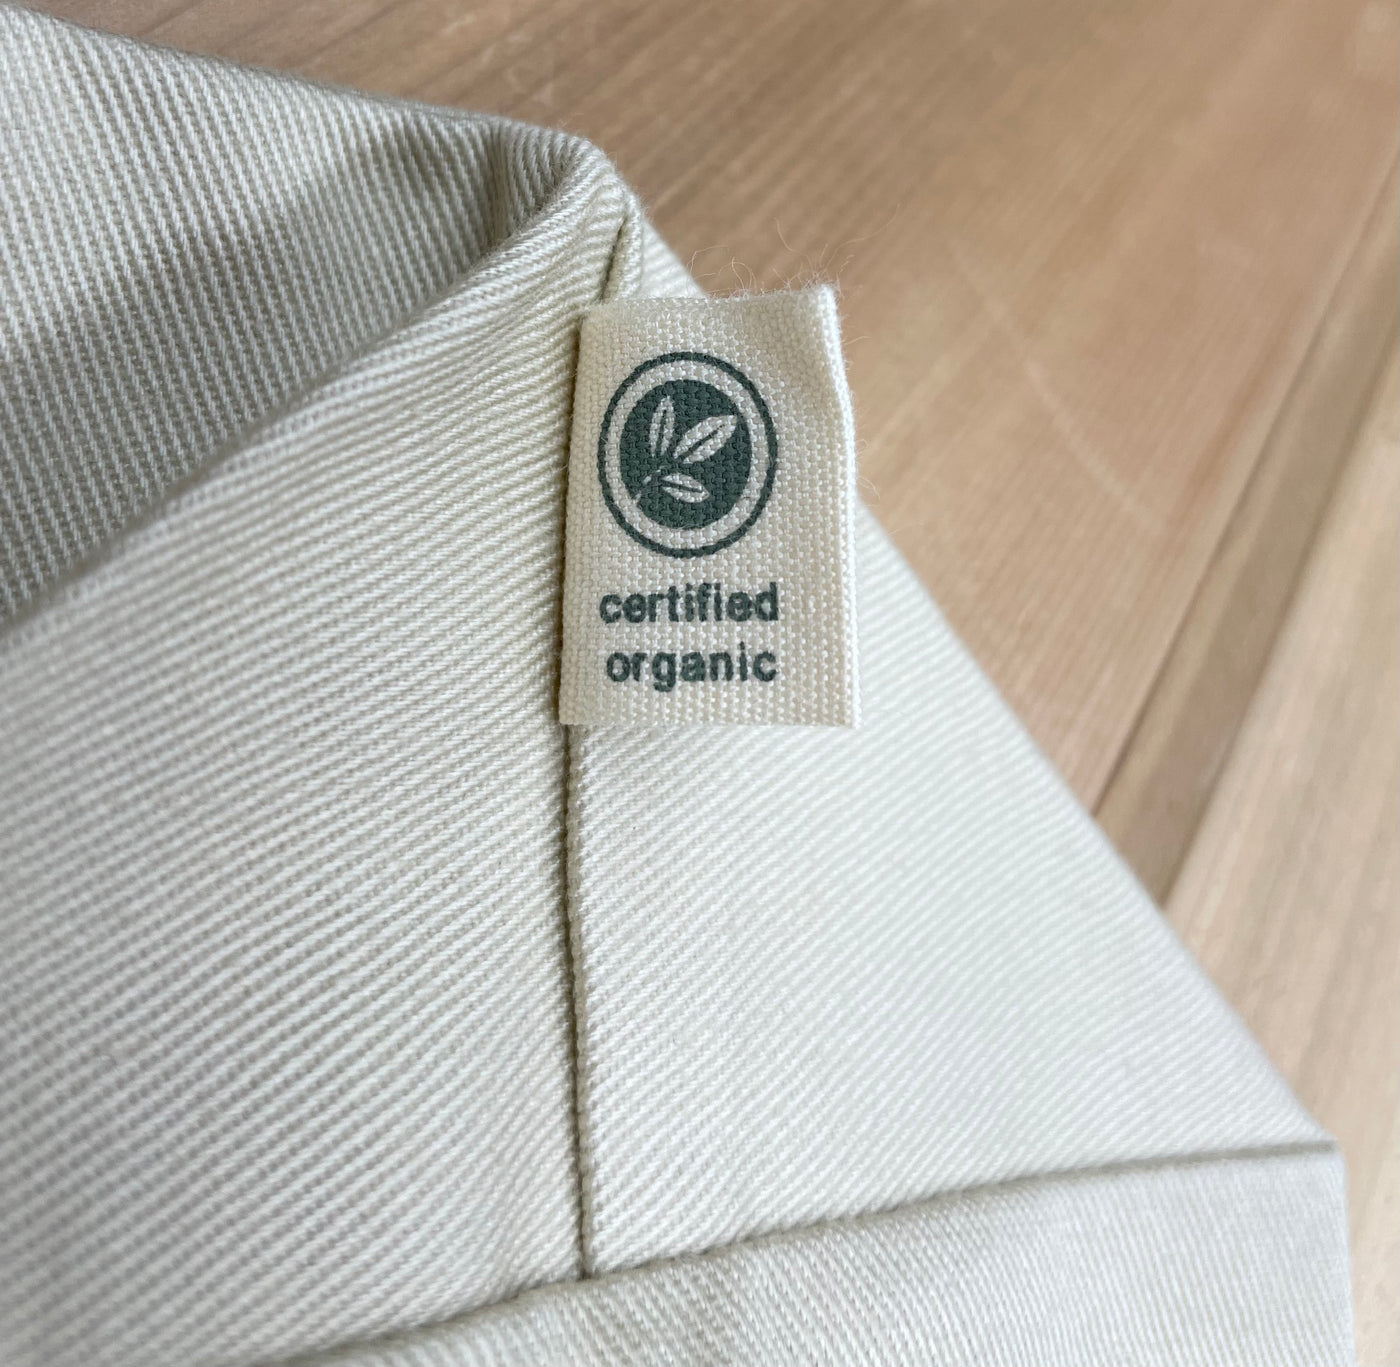 close up of certified organic cotton tag on the bag